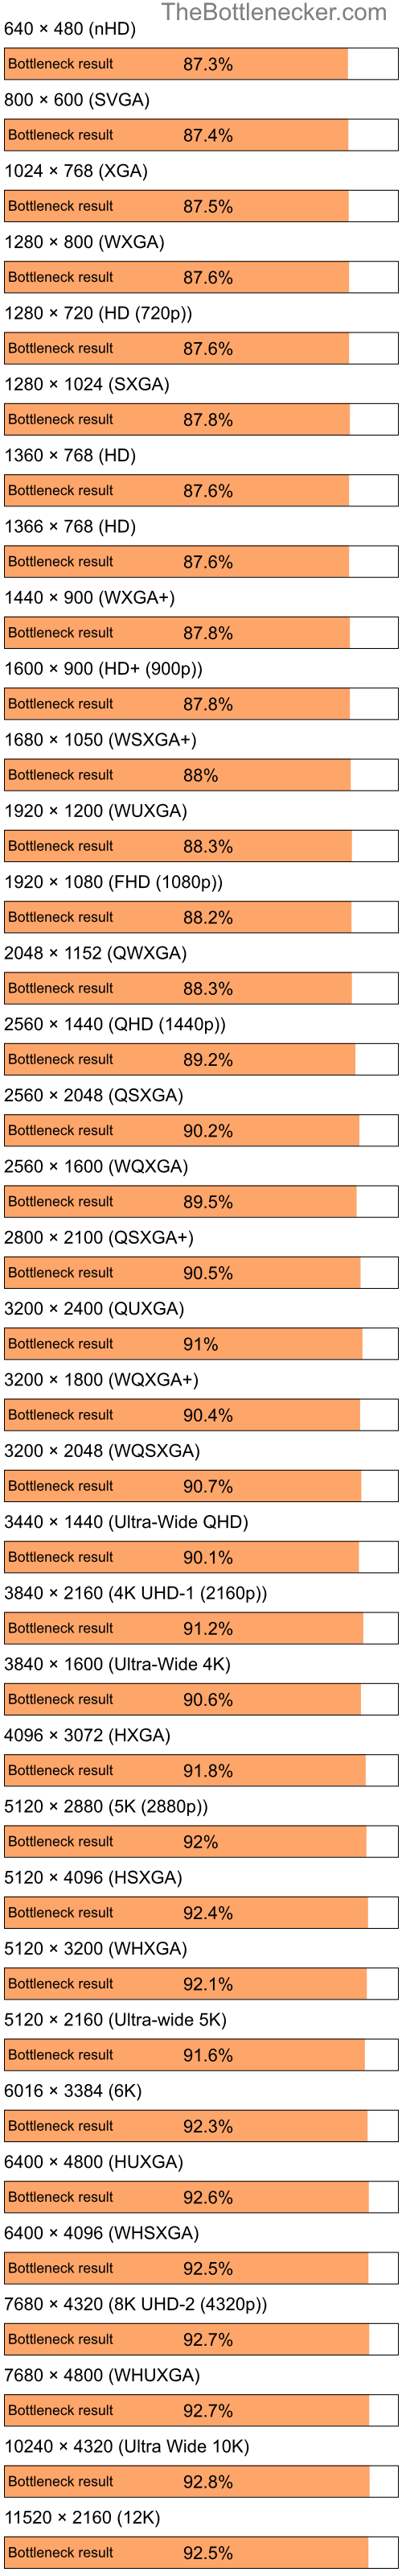 Bottleneck results by resolution for Intel Pentium 4 and AMD Radeon 9200 in Processor Intense Tasks